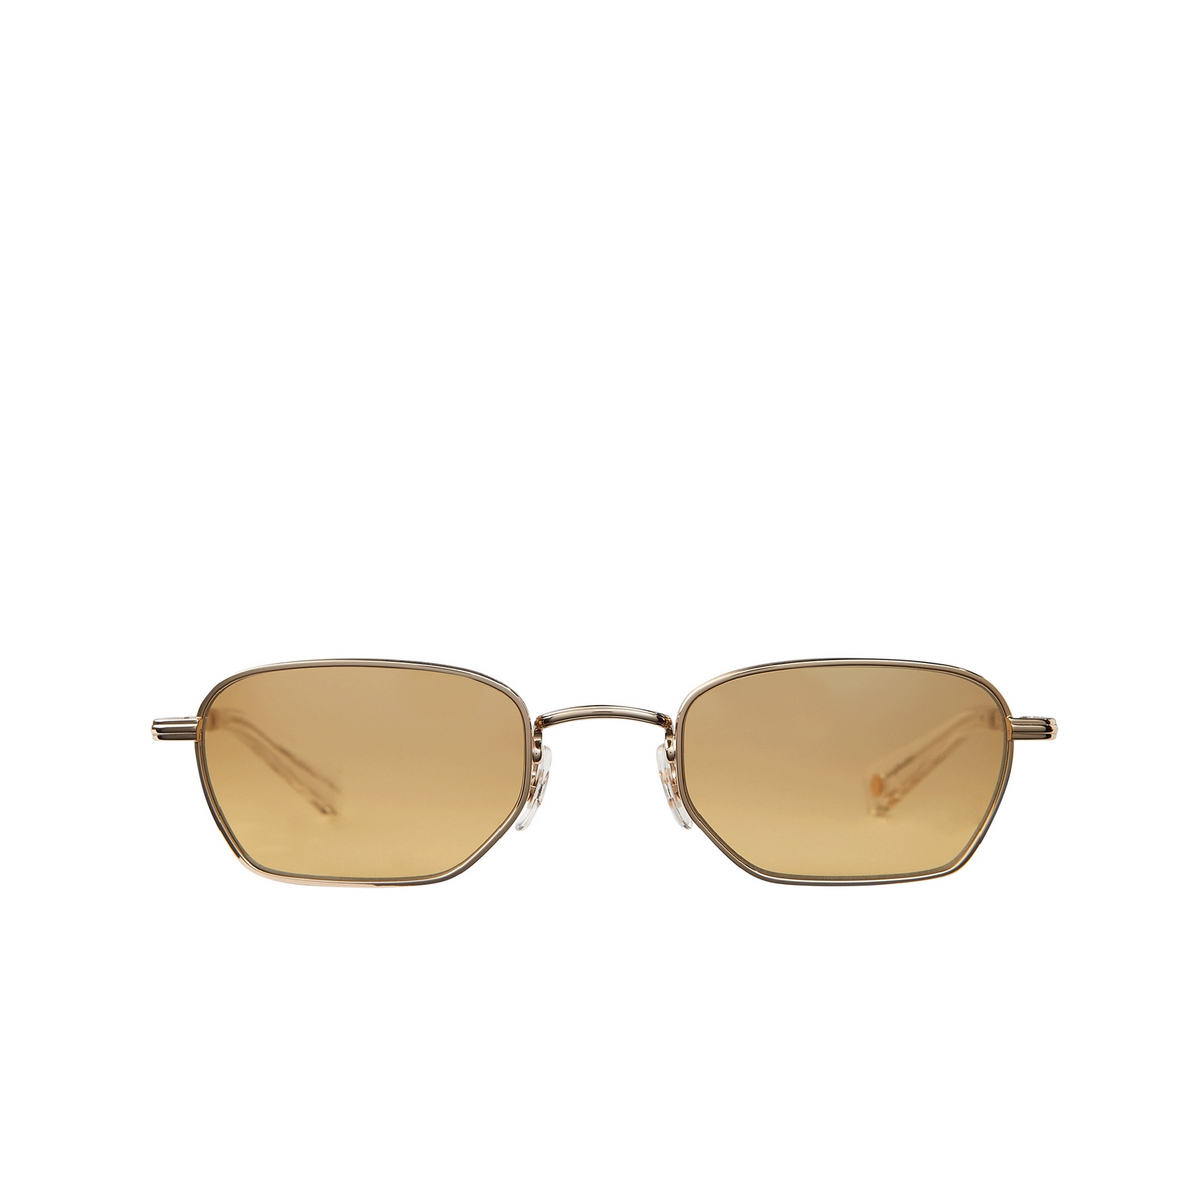 Garrett Leight HOLLY Sunglasses G-CR/HM Gold-Crystal/Halo Mirror - front view